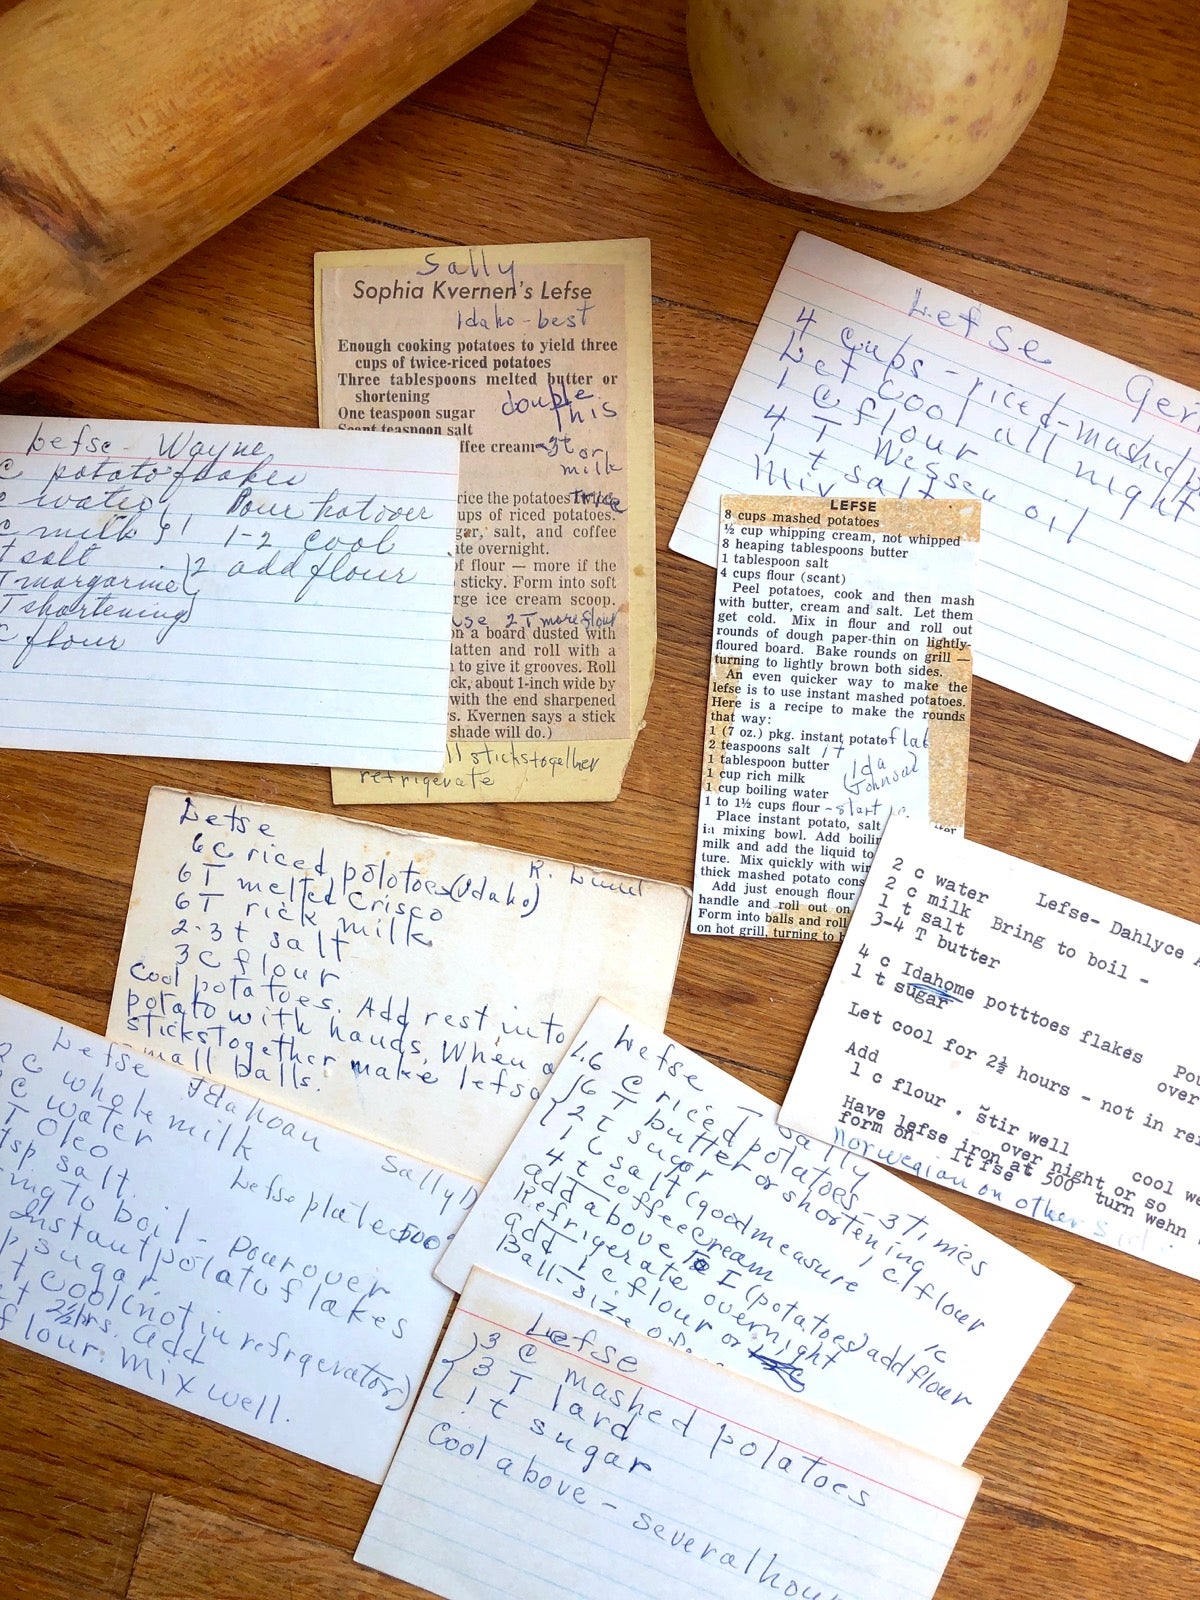 Recipe cards for lefse scattered on a kitchen table.